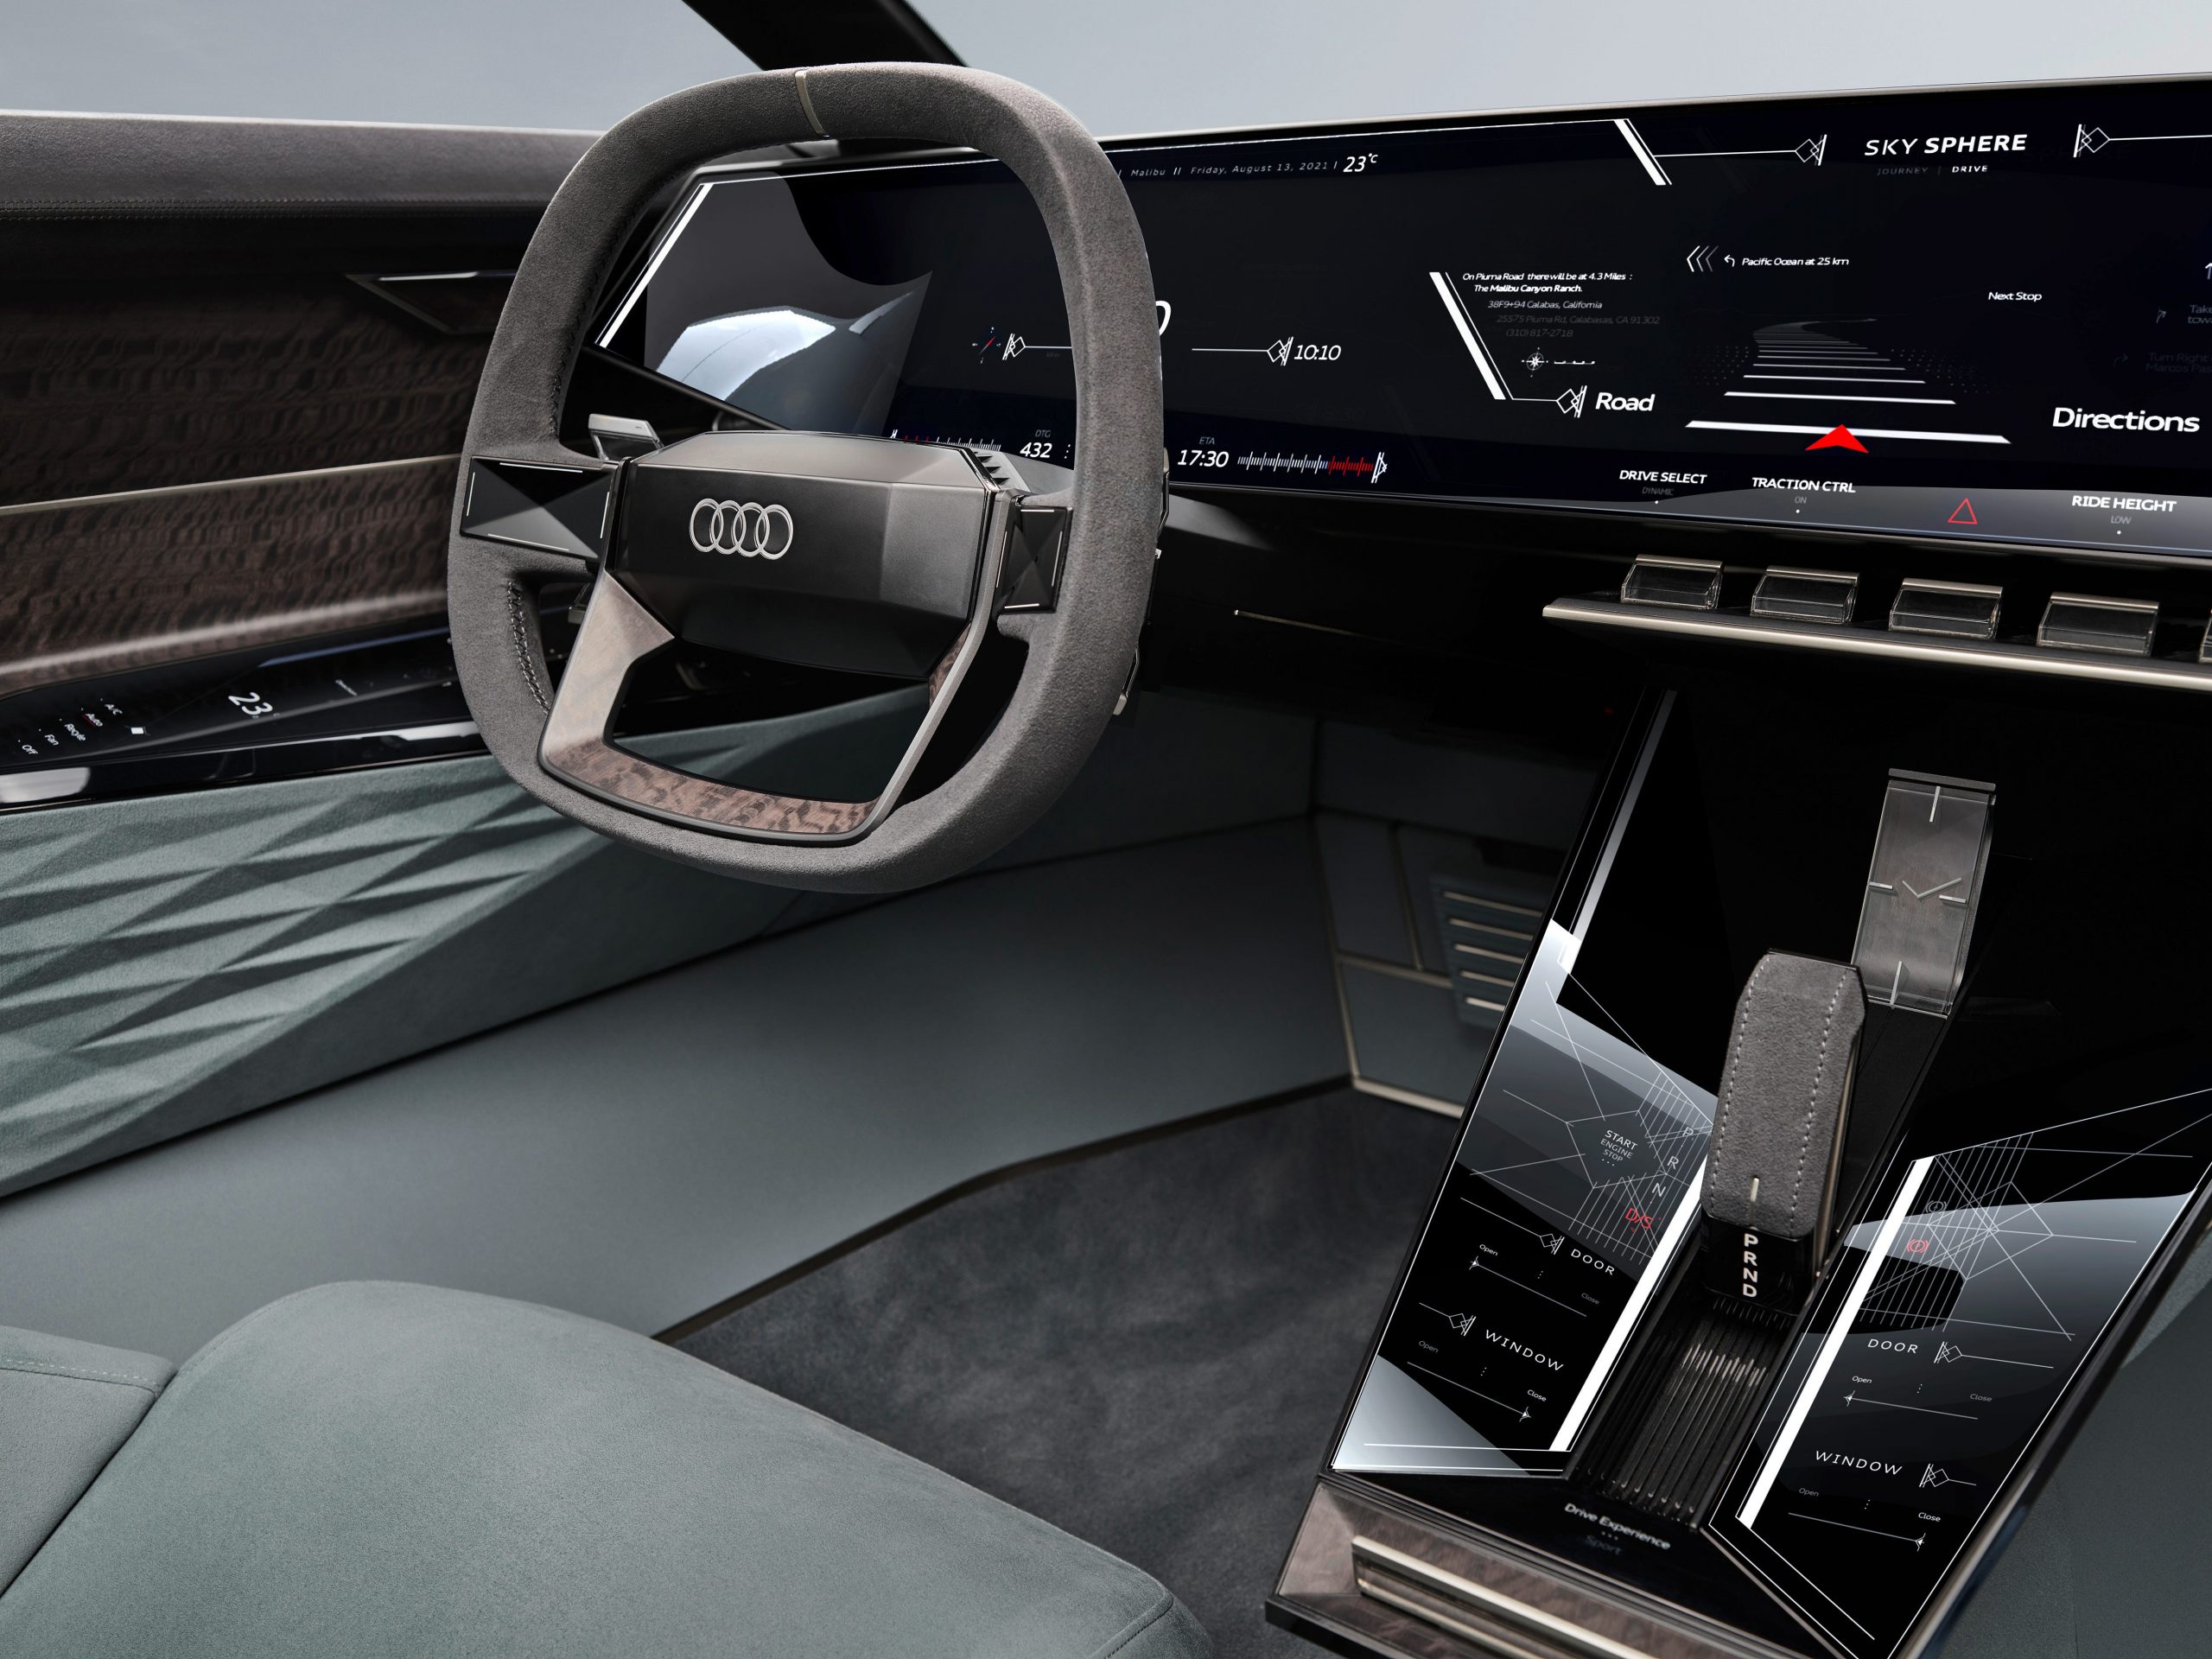 The grey interior of Audi's new Skysphere concept with a steering wheel that is slightly square shaped.